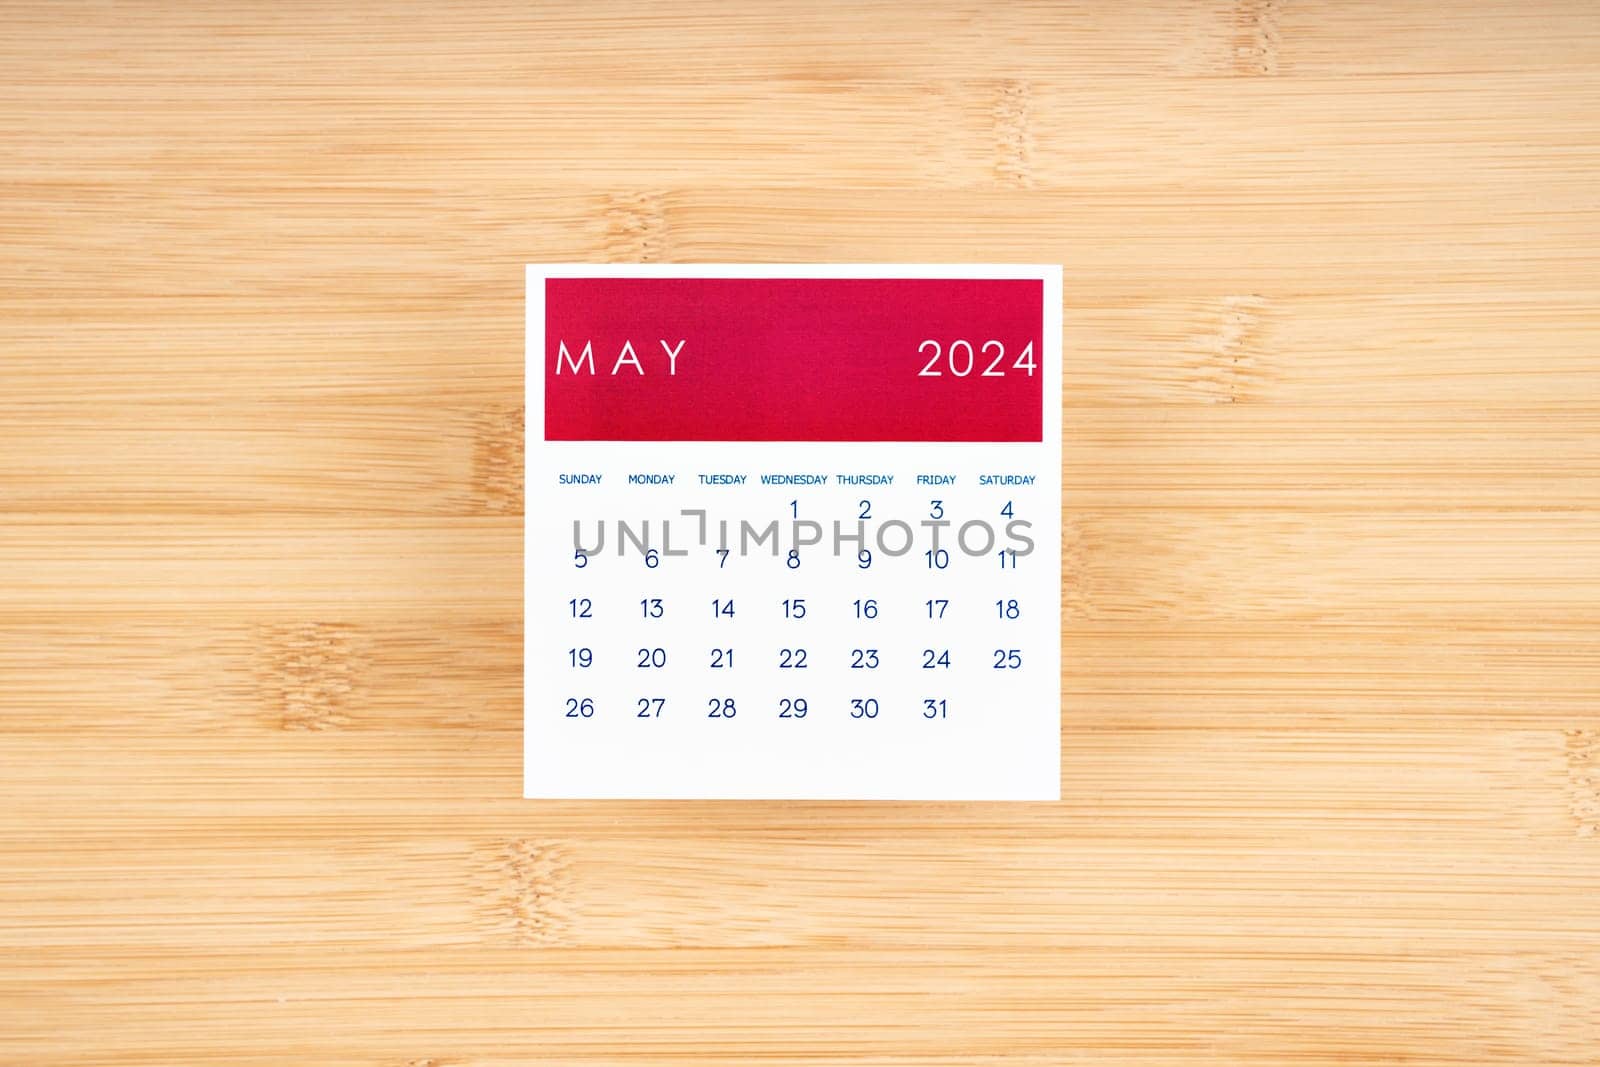 May 2024 calendar page on wooden background with empty space.